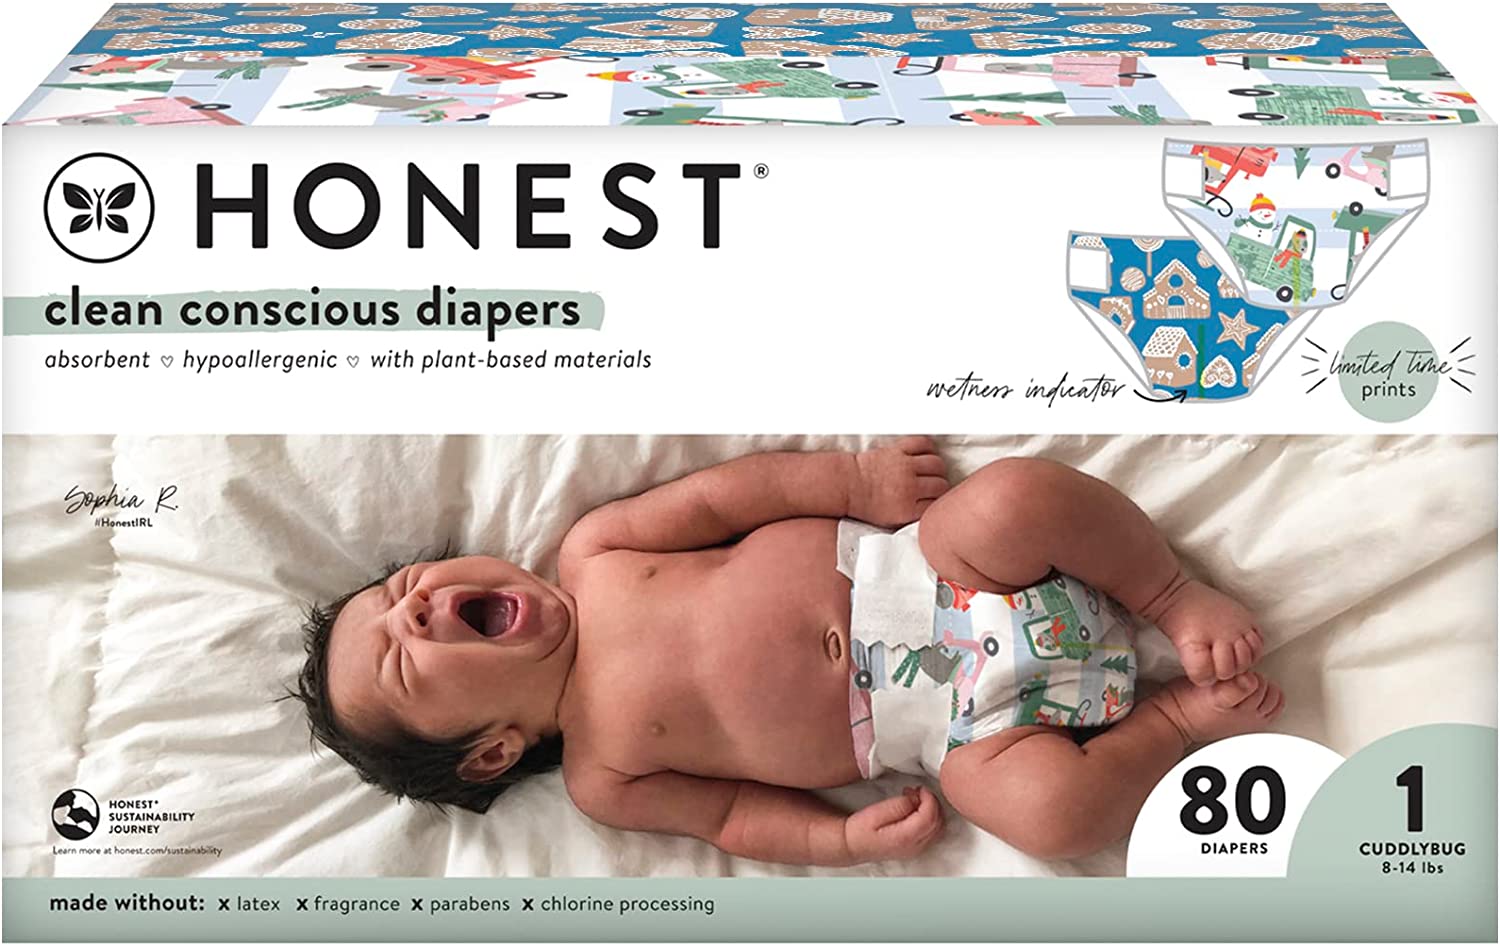 The Honest Company Clean Conscious Diapers | Plant-Based, Sustainable | Holiday ’22 Prints | Club Box, Size 1 (8-14 lbs), 80 Count